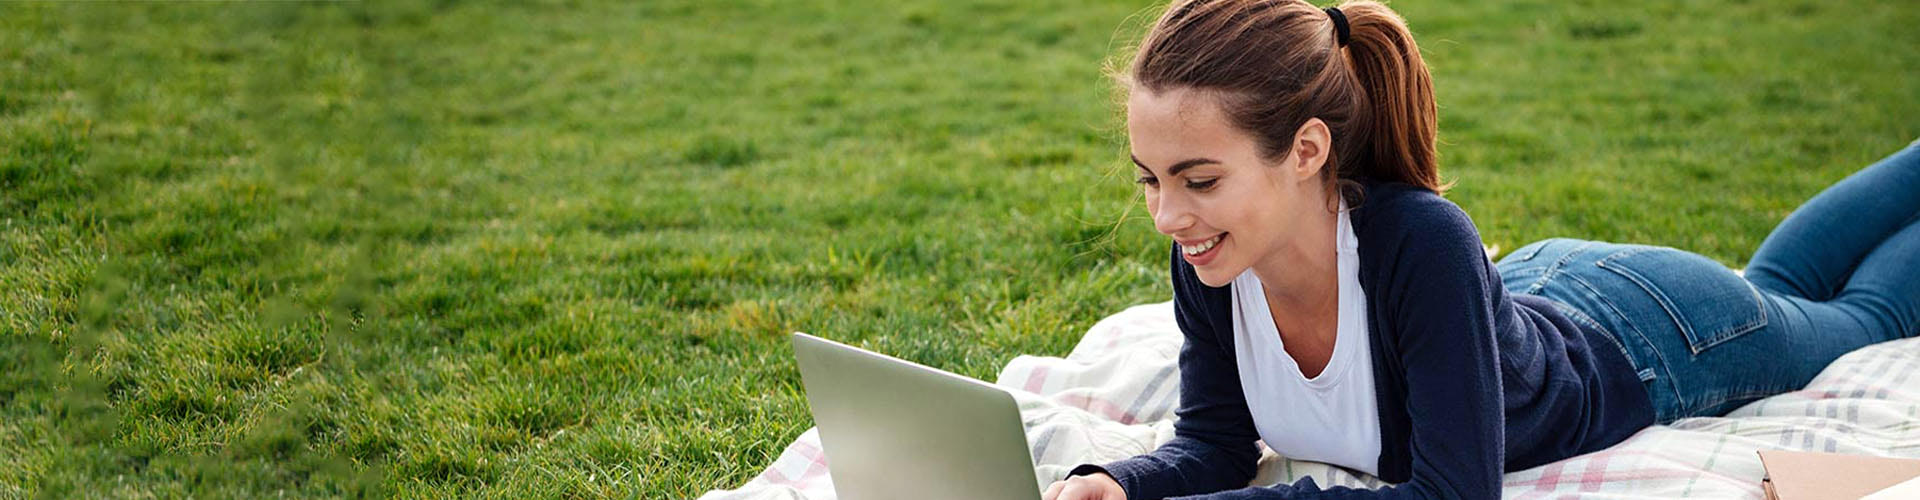 Student laying on the lawn working on her laptop